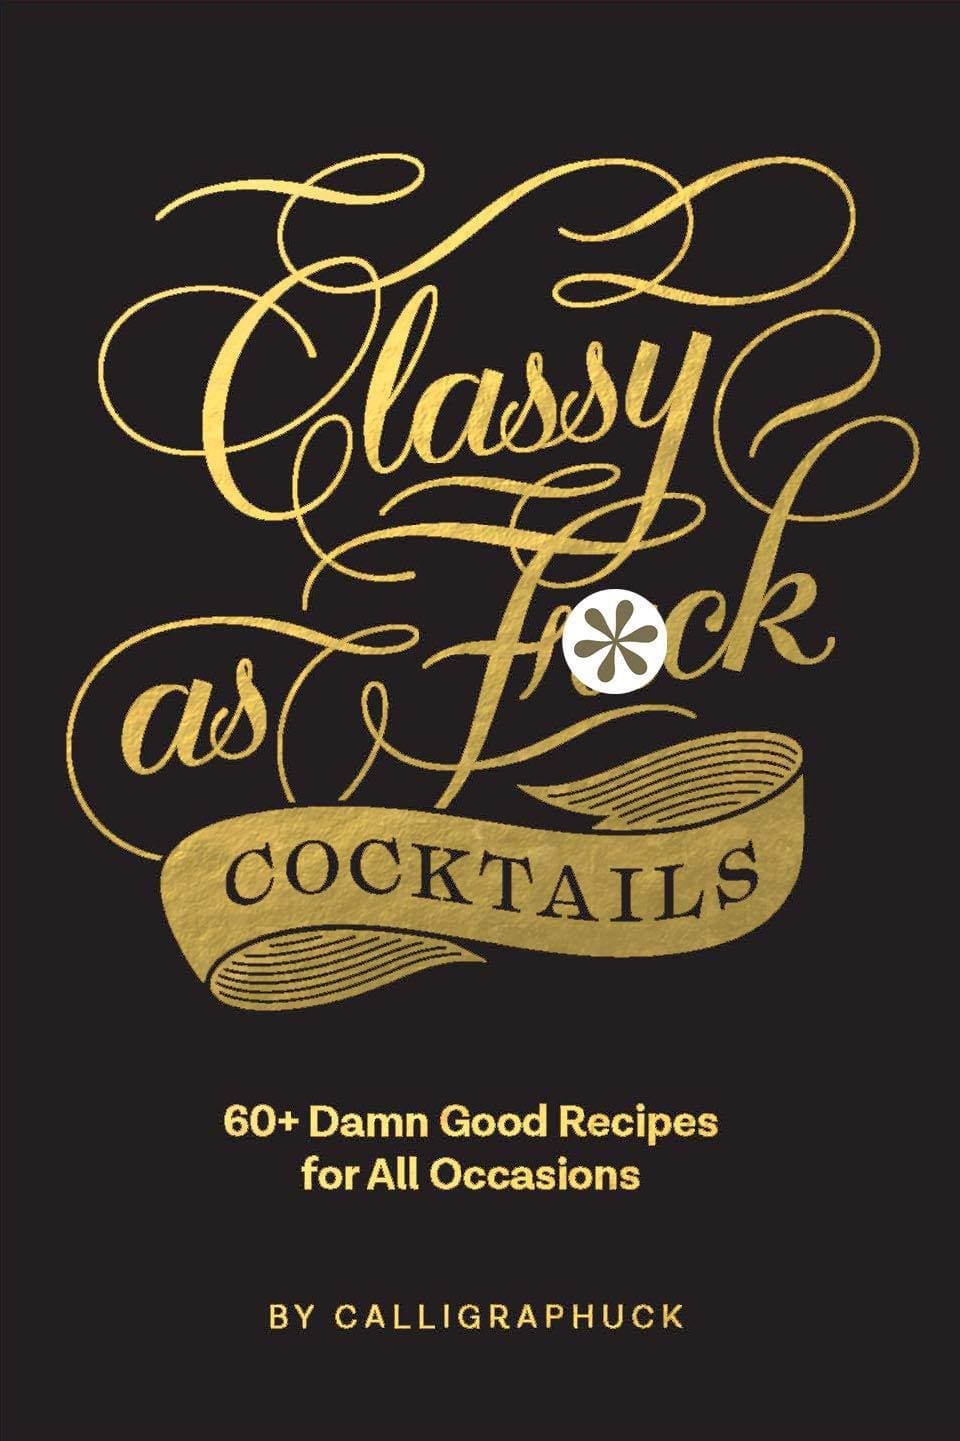 Classy Cocktails Book